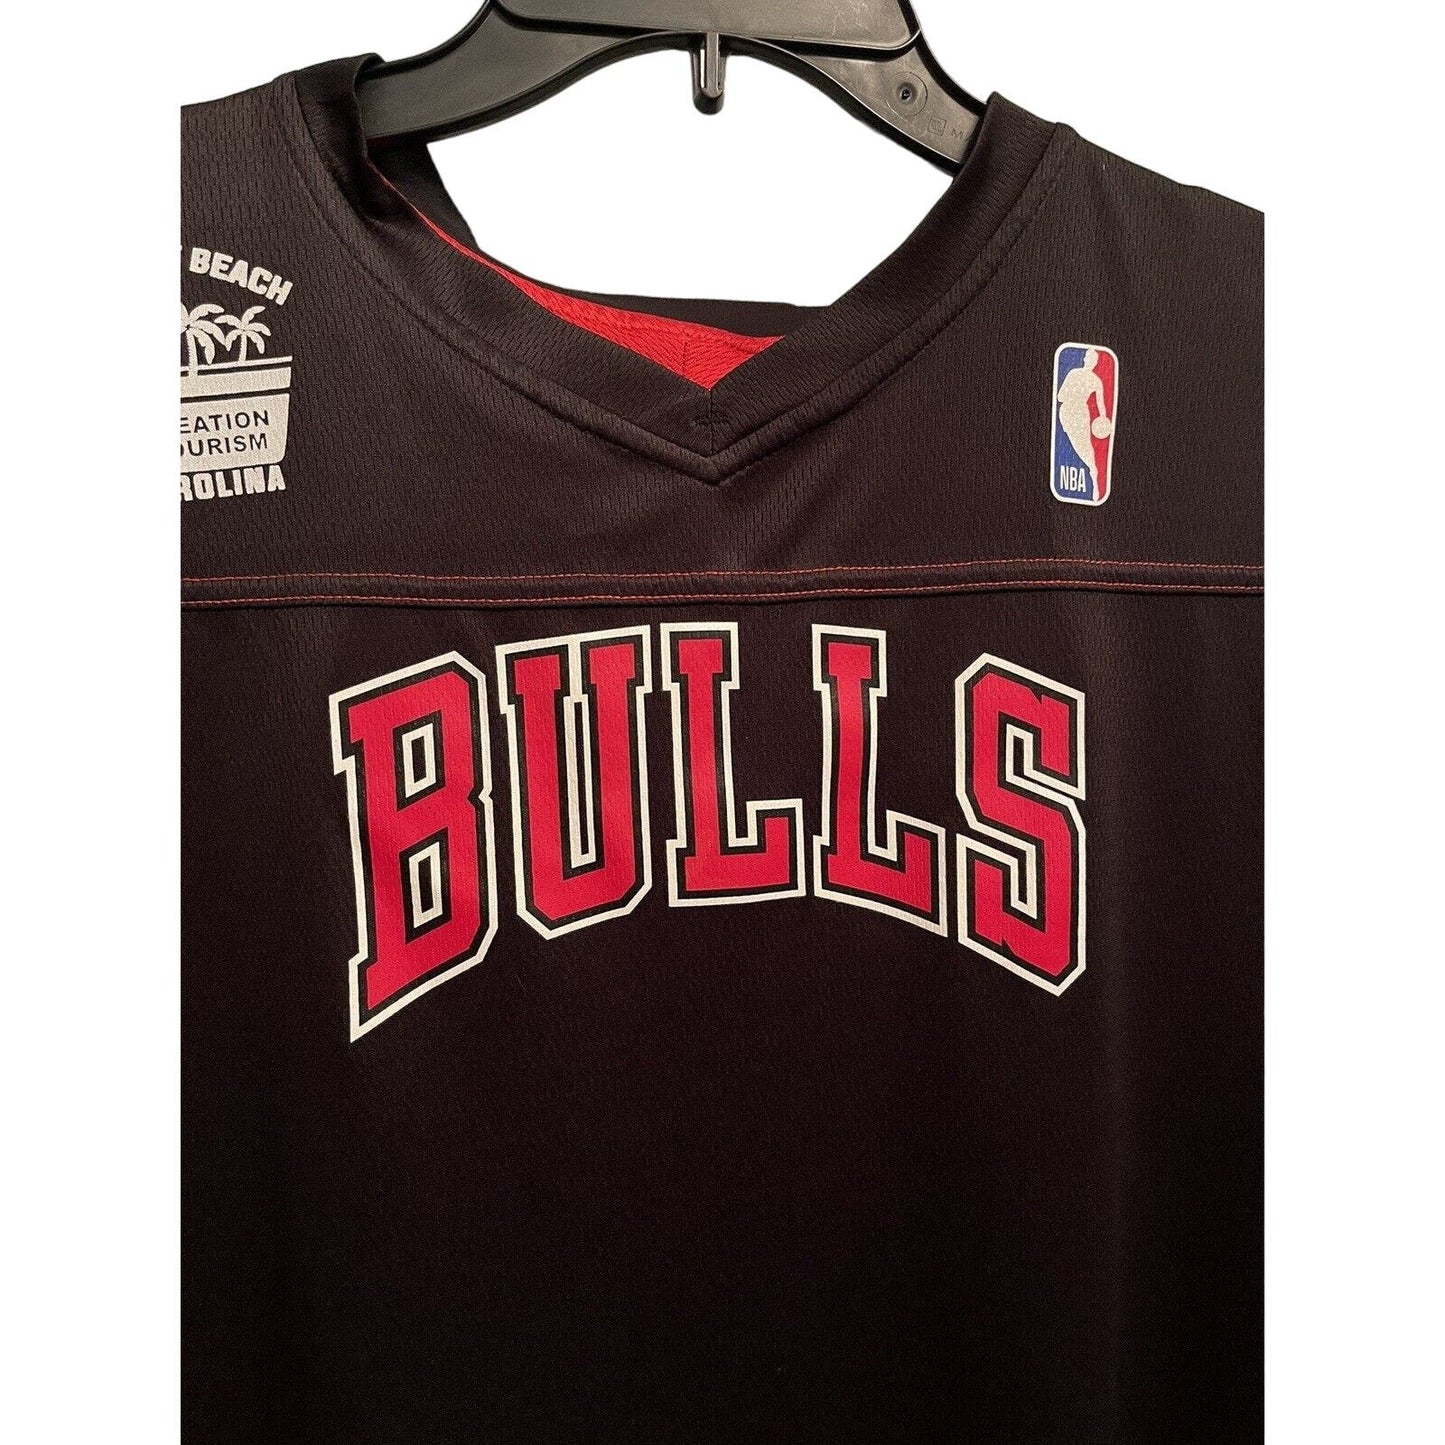 Chicago Bulls Reversable Black & Red Jersey Scrimmage Adult Large